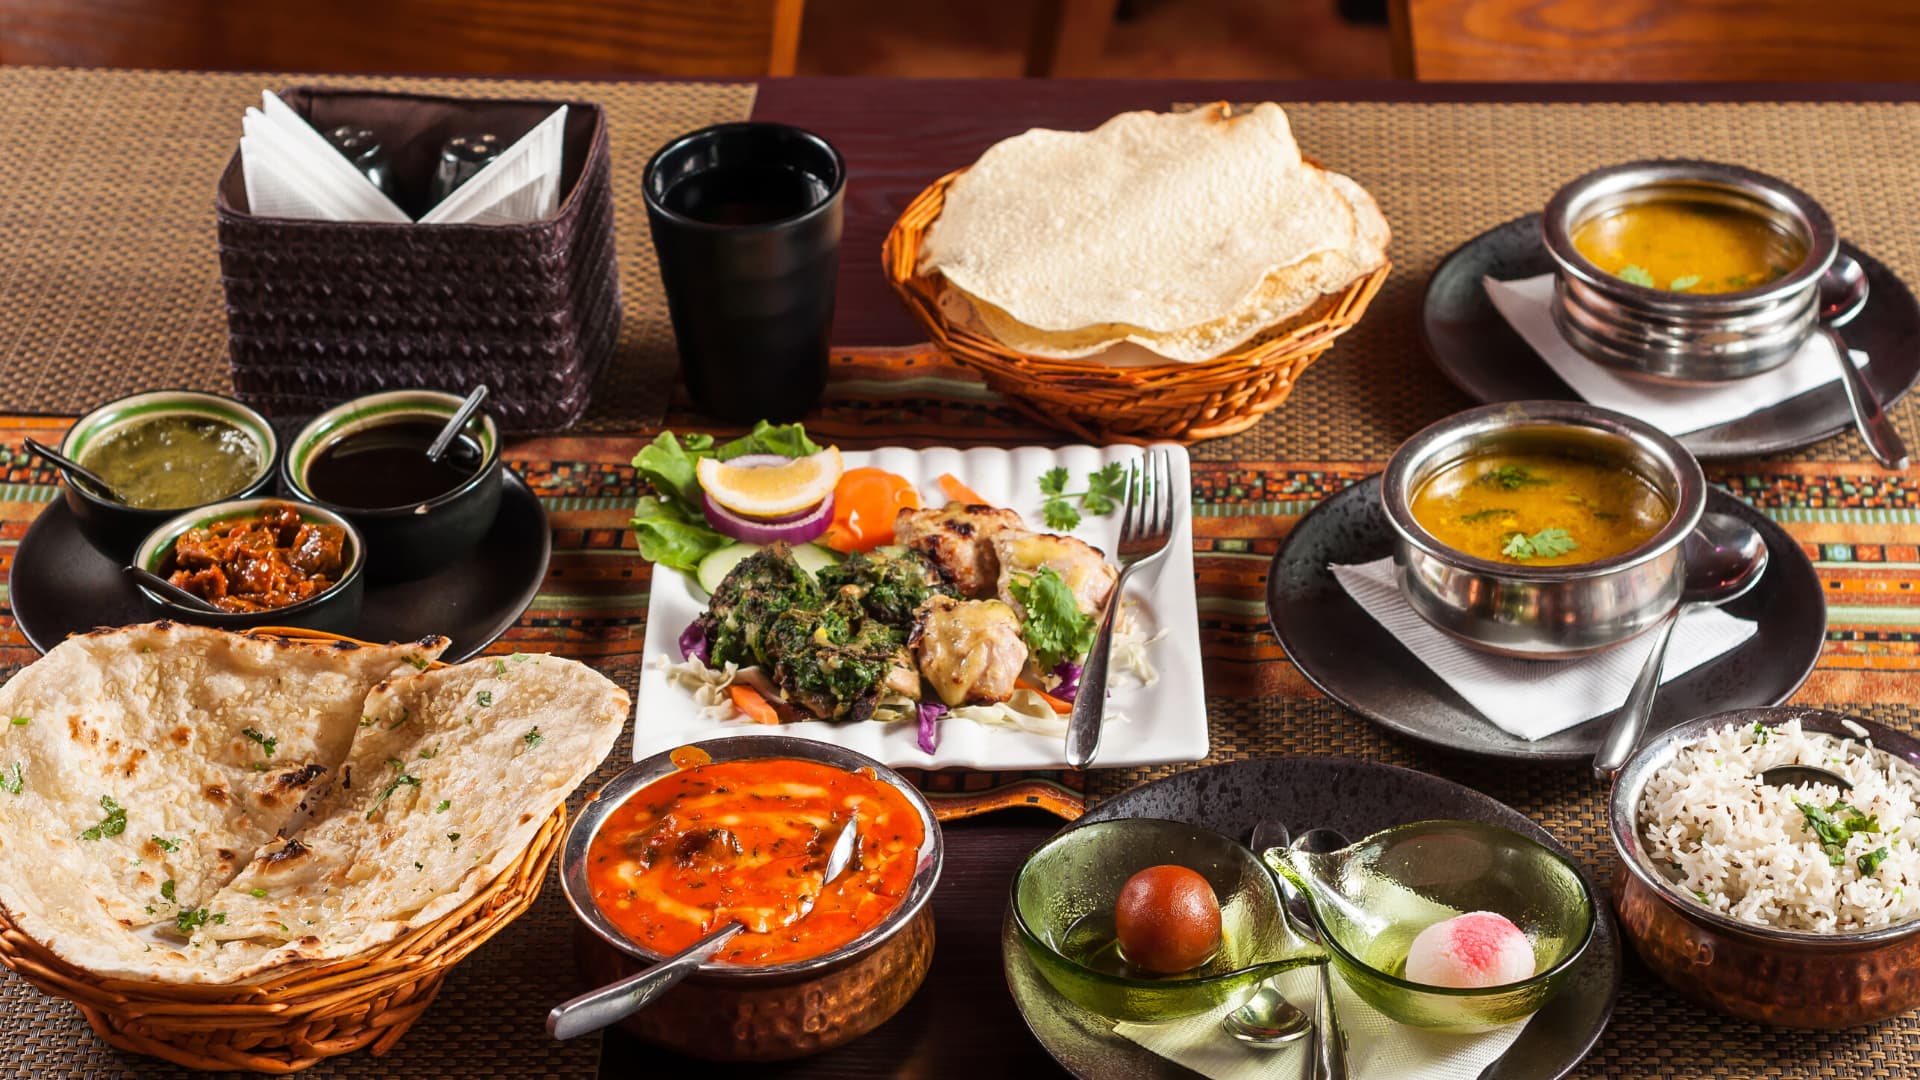 Flavourful Indian Delights at The Grand Pavilion